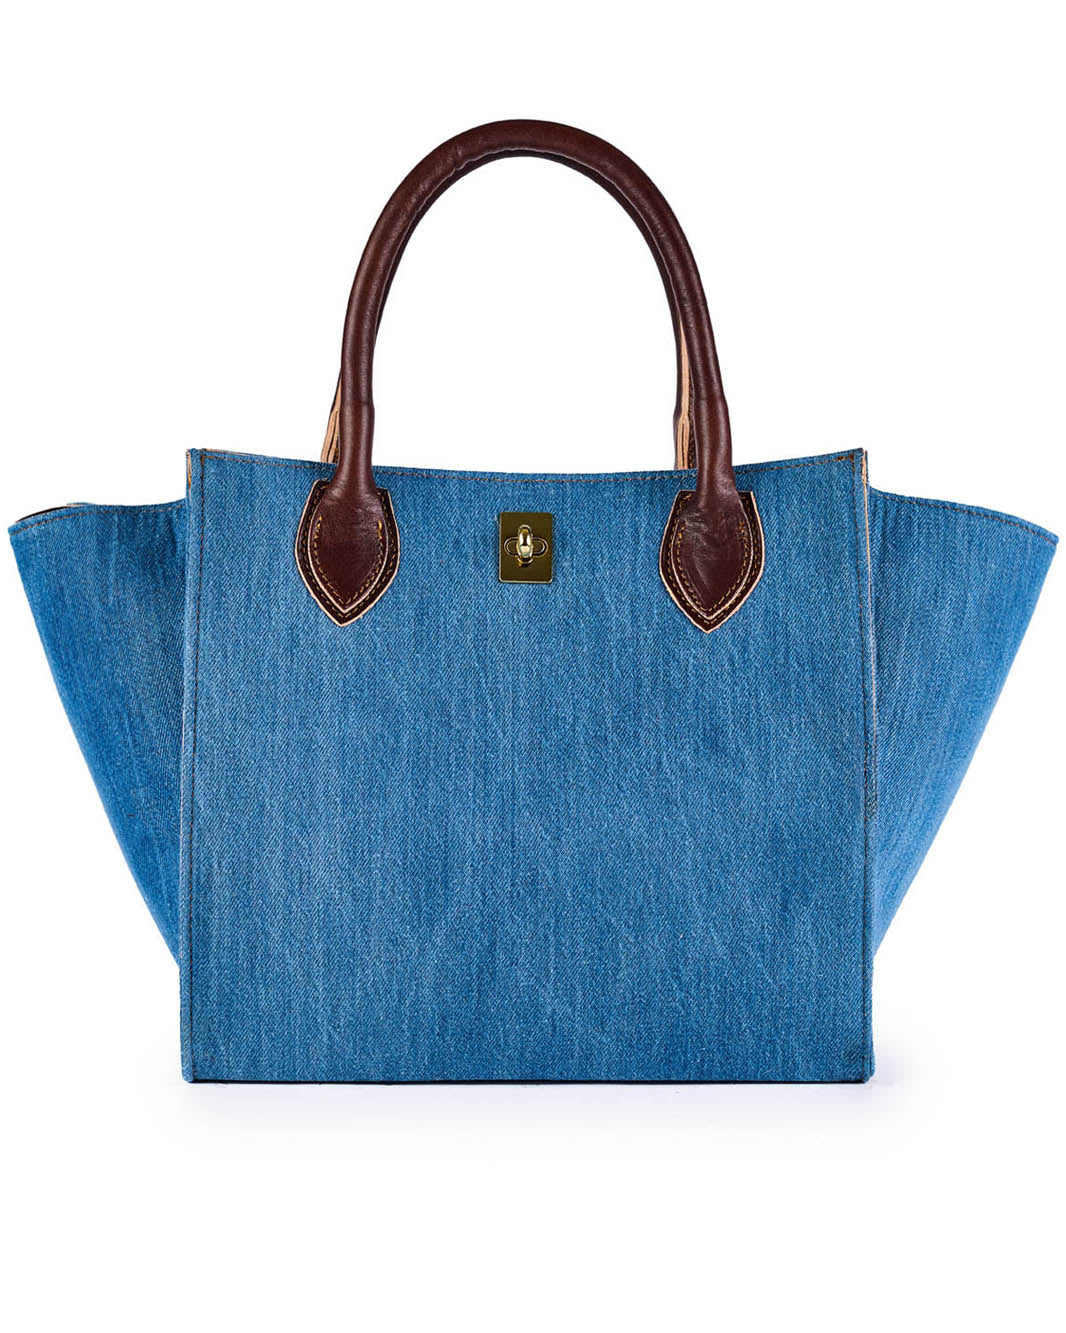 Blue denim tote bag with brown leather handles